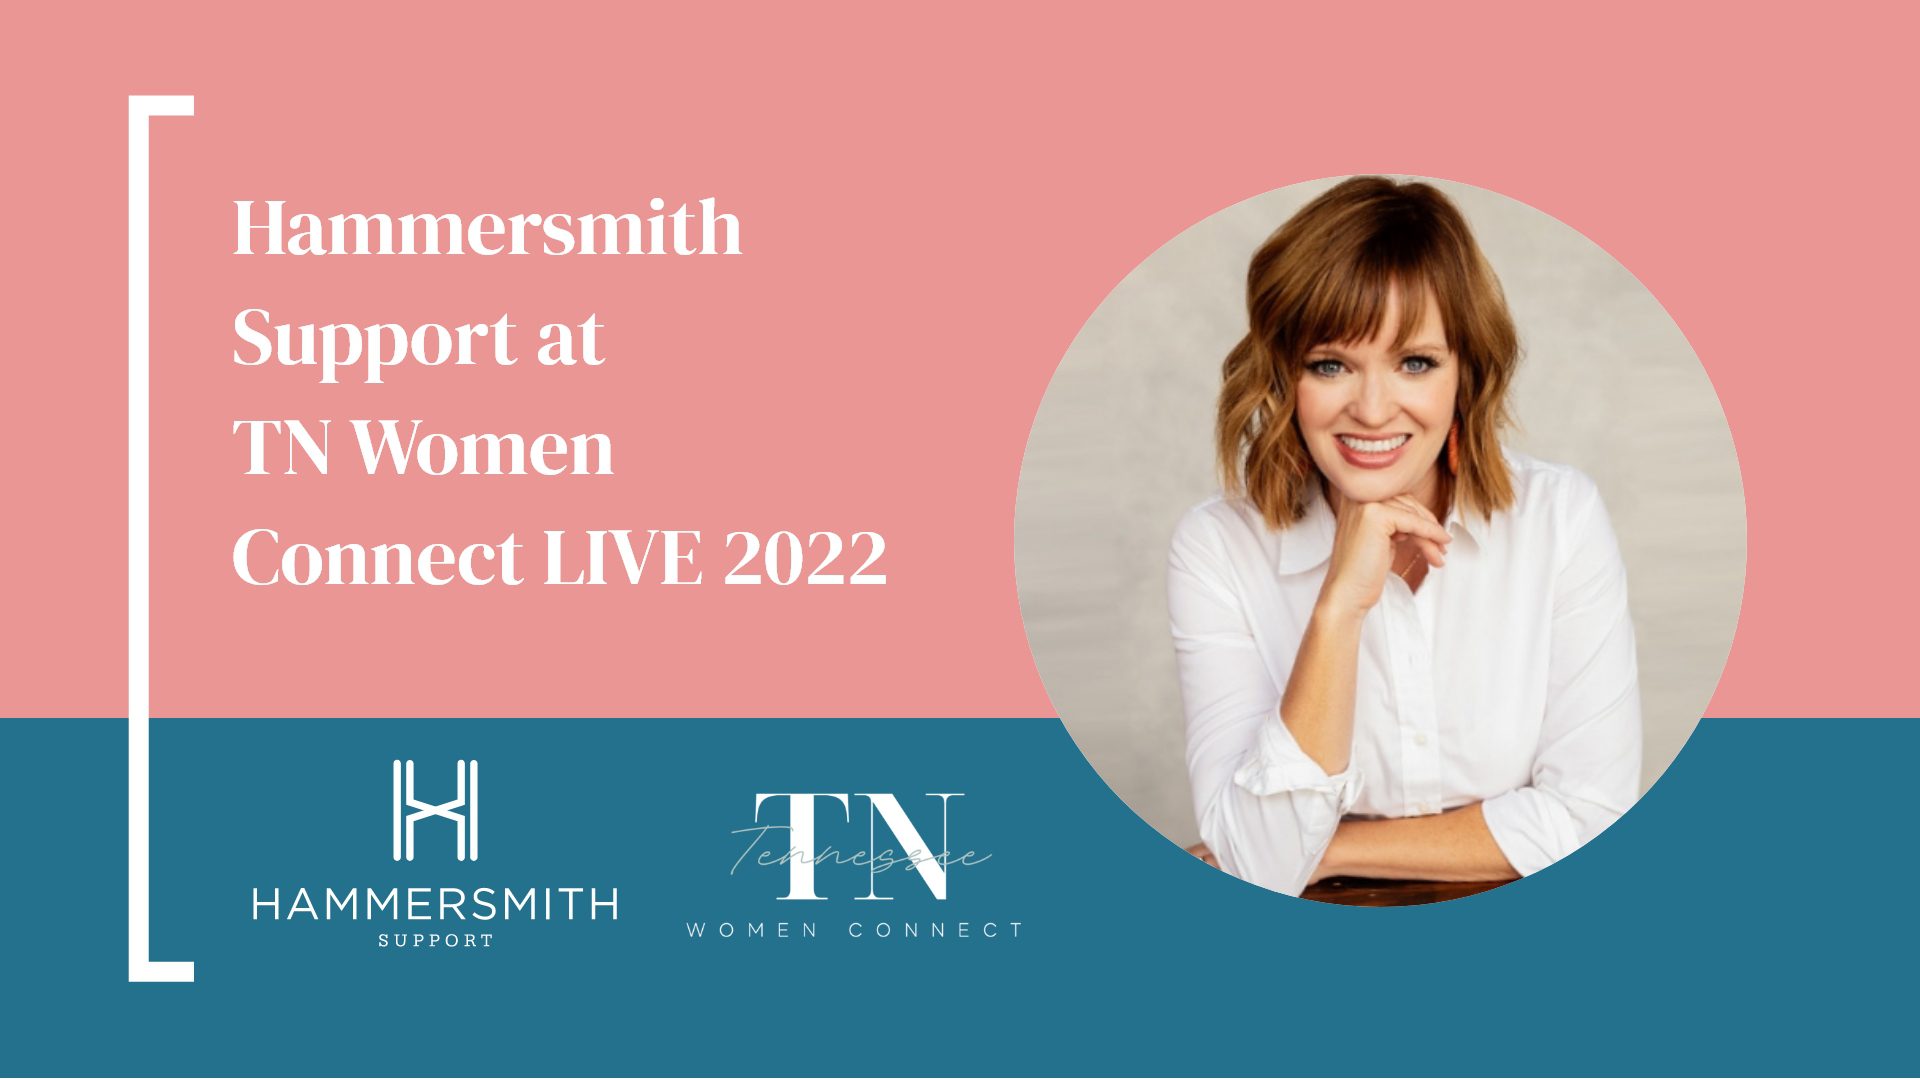 Hammersmith Support at TN Women Connect LIVE 2022